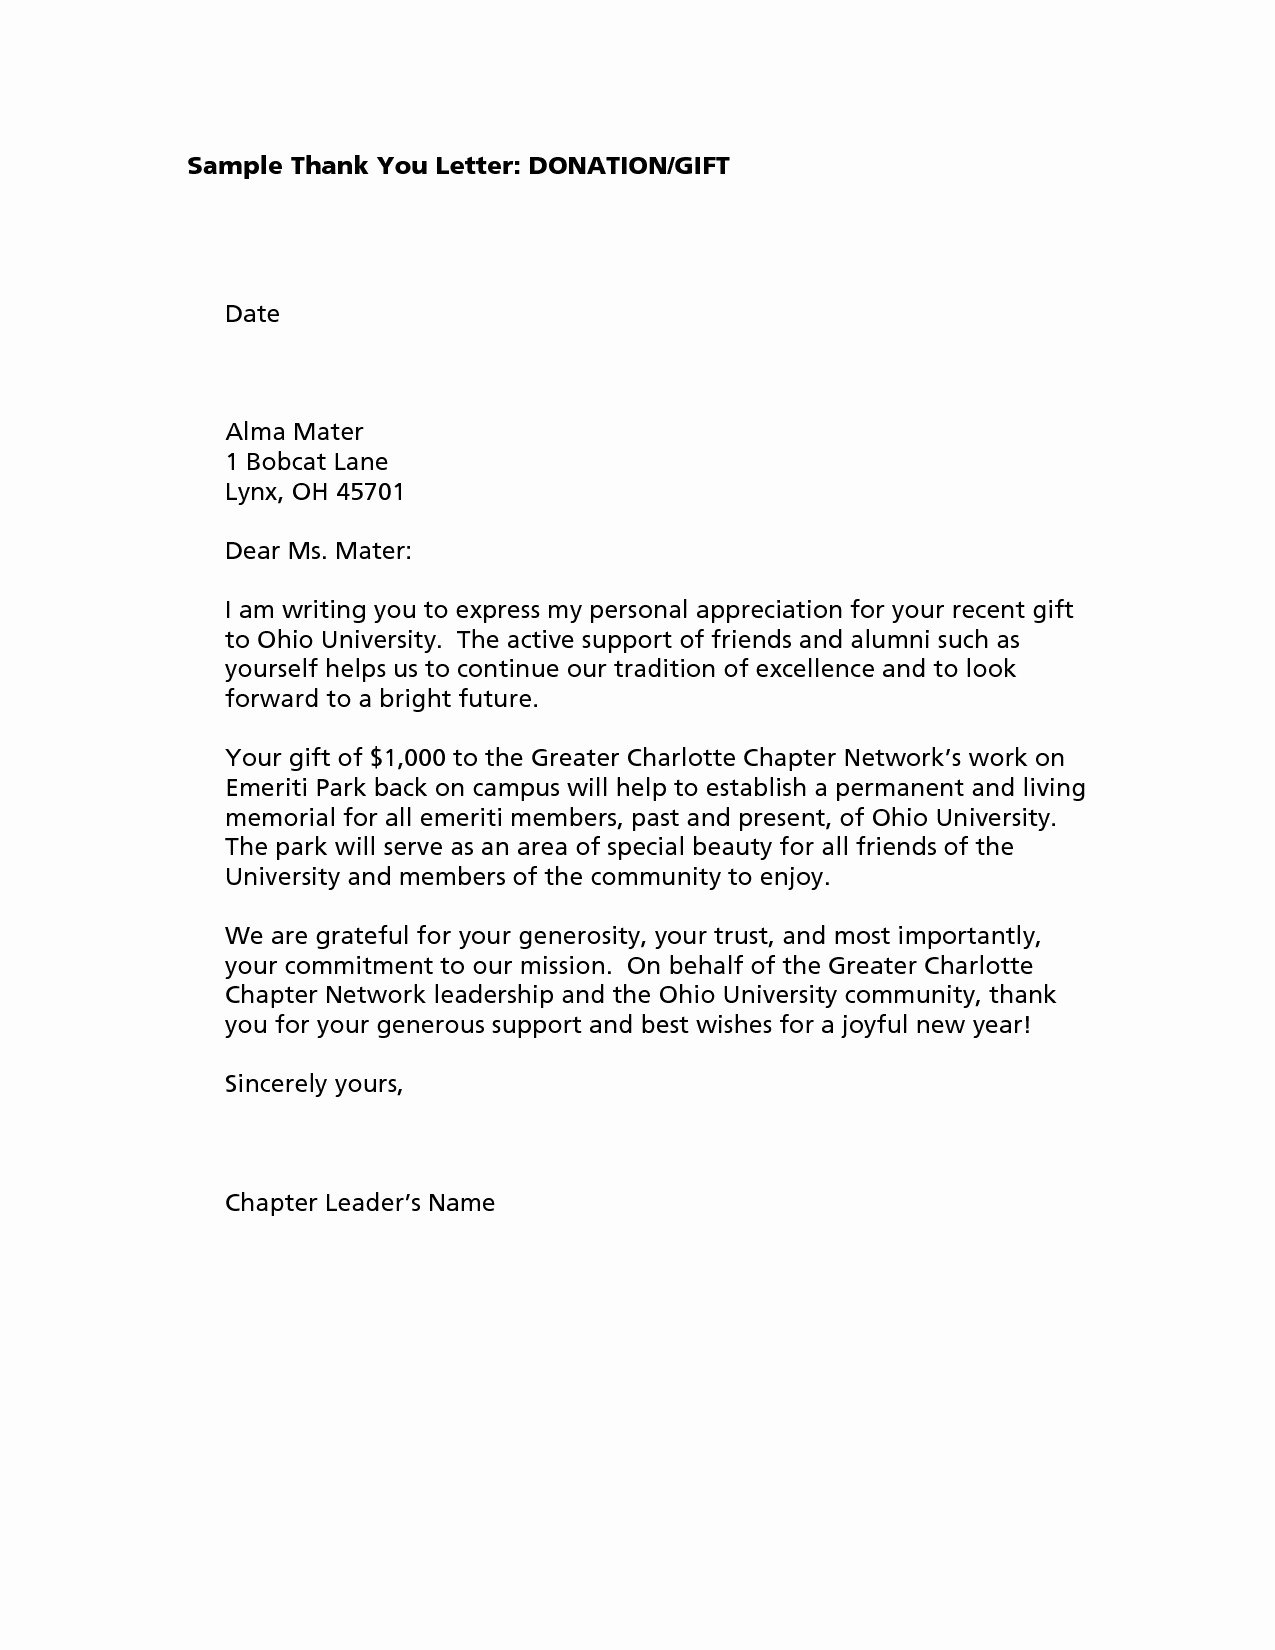 Letter Of Support Templates Inspirational Travel Fundraising Letter Sample Fundraising Support